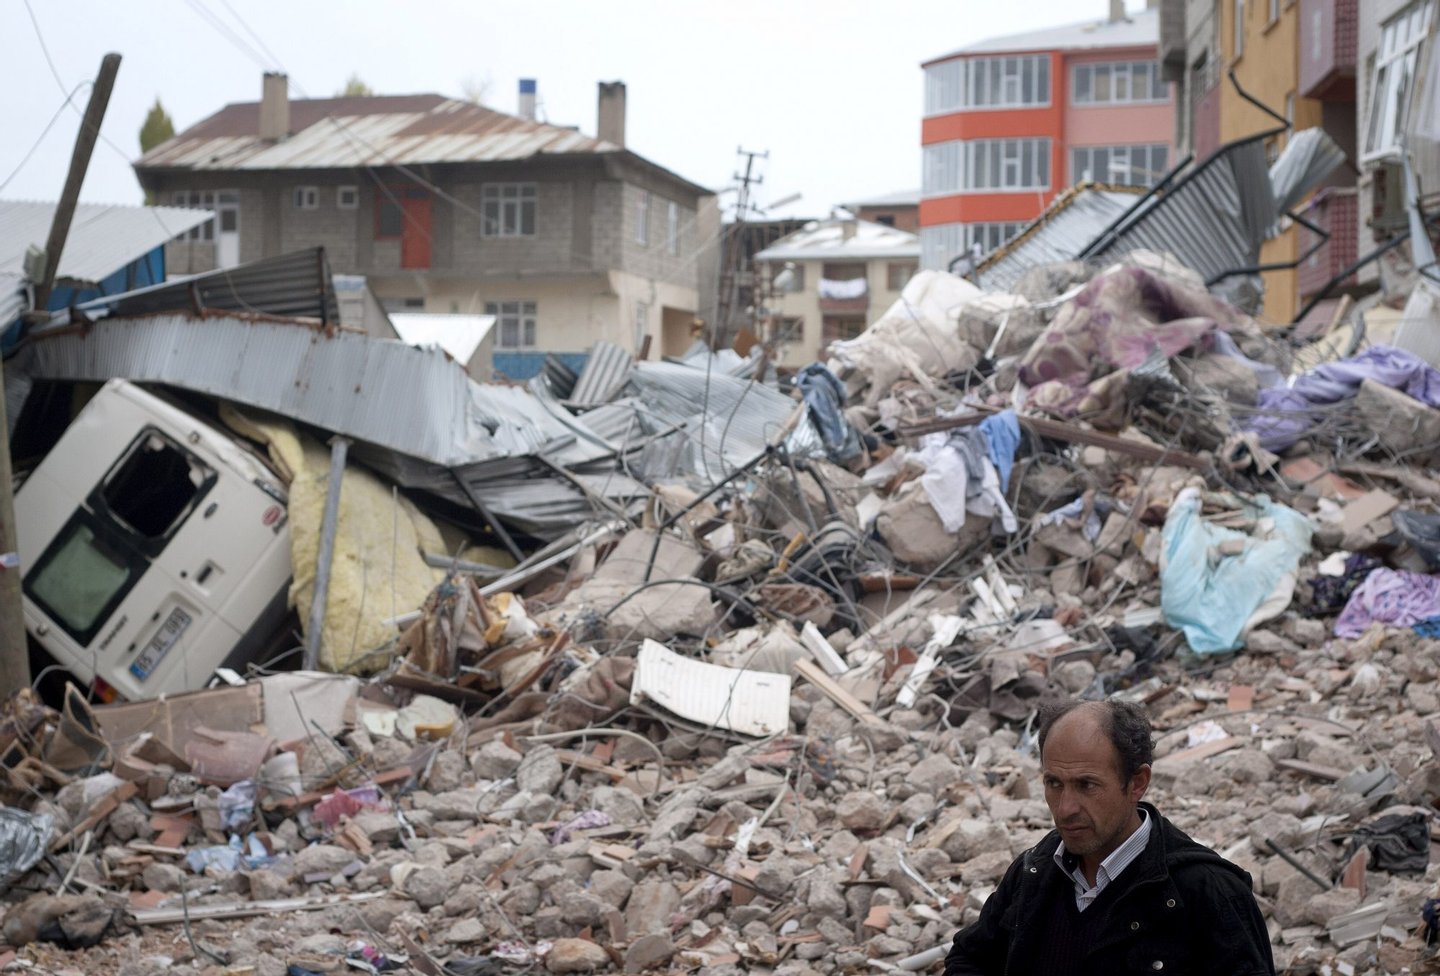 VAN, TURKEY - OCTOBER 26: A Turkish man stands in front of a ruined building after an earthquake, on October 26, 2011 in Van, Turkey. Media are reporting more than 400 people have been killed in the 7.2 earthquake that struck in Eastern Turkey on October 23. The earthquake has left up to 40,000 people homeless in almost freezing conditions. (Photo by Ahmad Halabisaz/Getty Images)